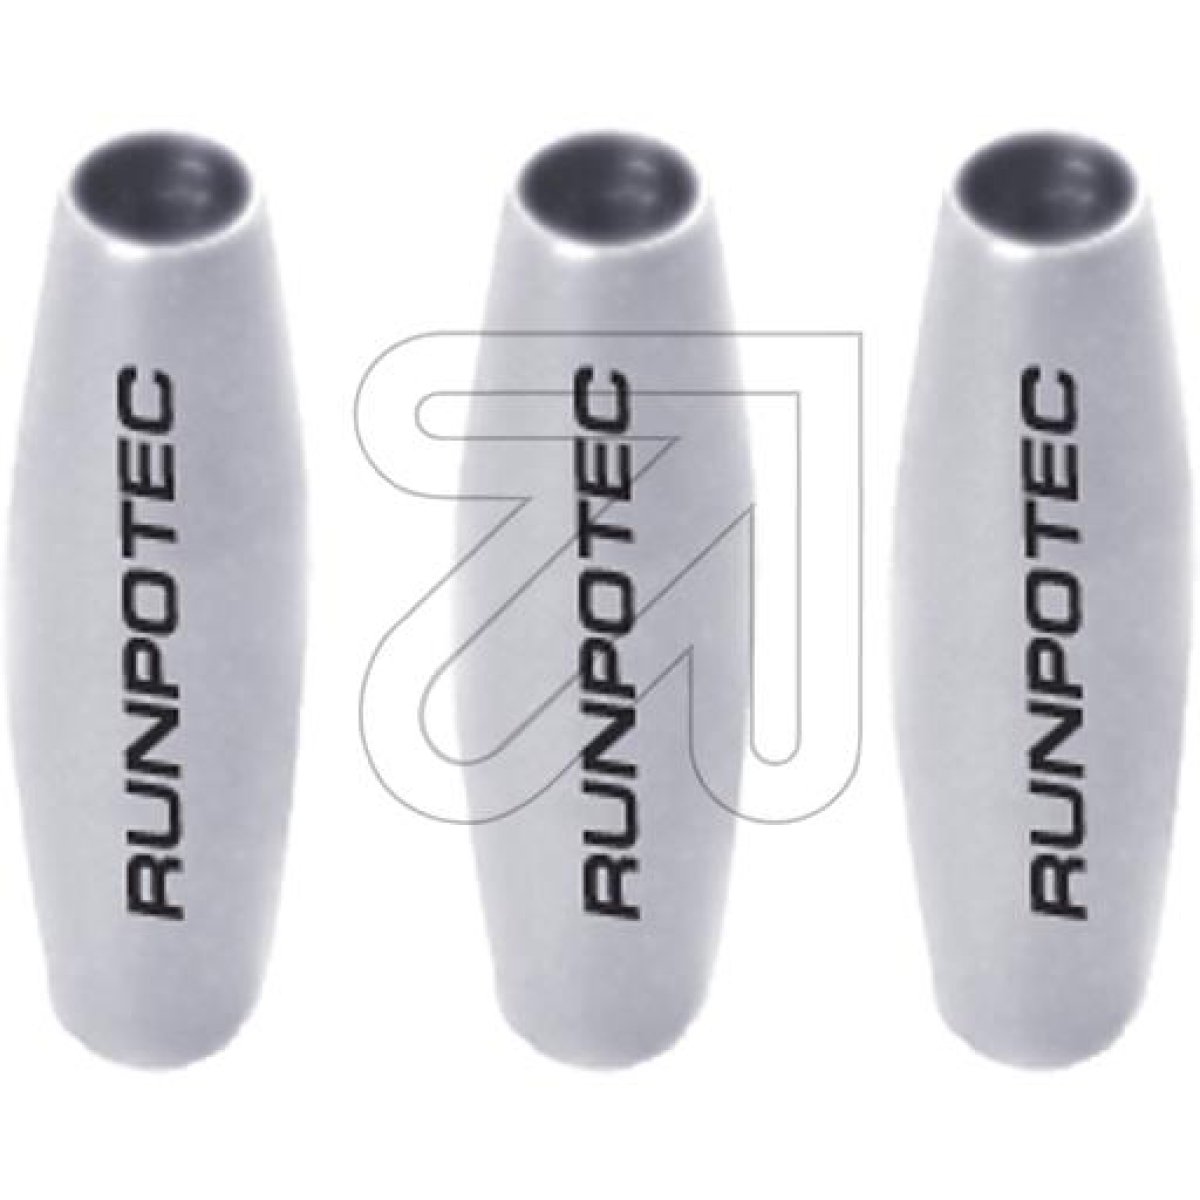 RUNPOTECConnection sleeve 20108 (1 pack = 3 pieces)-Price for 3 pcs.Article-No: 756545